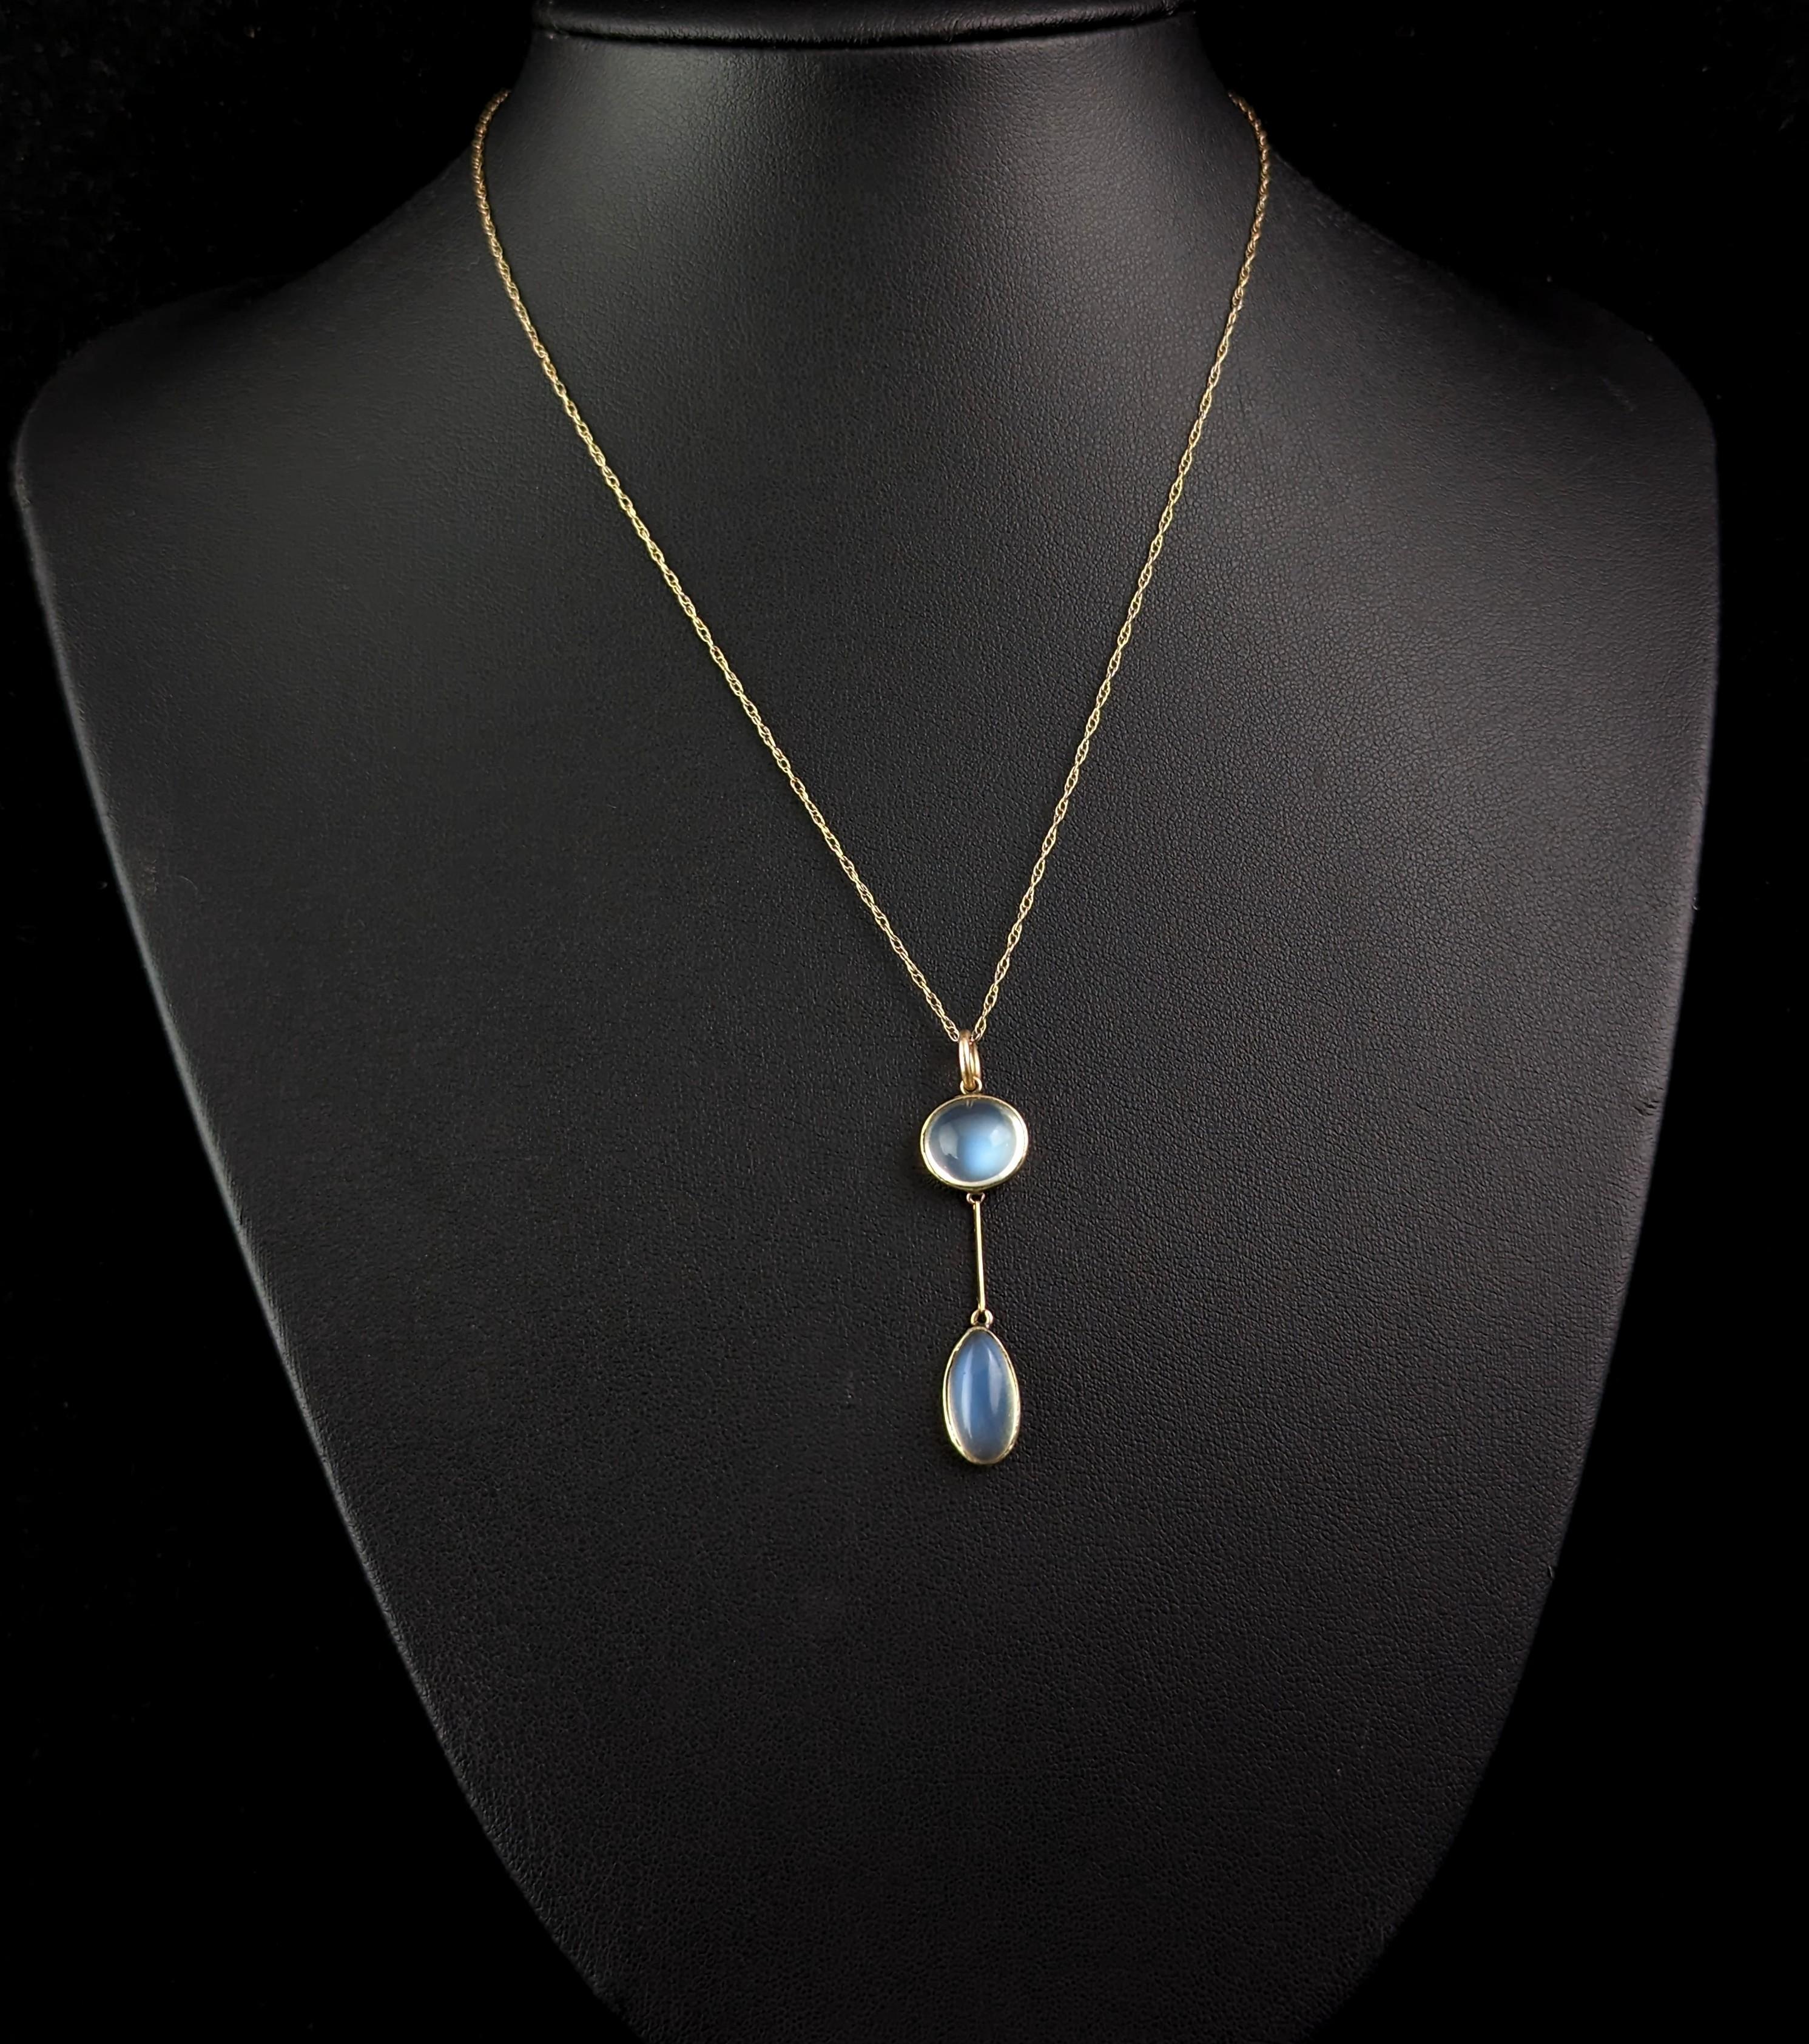 This mystical and magical antique moonstone pendant necklace is sure to impress.

Moonstone is such a coveted gemstone in antique jewellery, always adding a little mysticism and magic allure, with it's cool blue tones this pendant really stands out